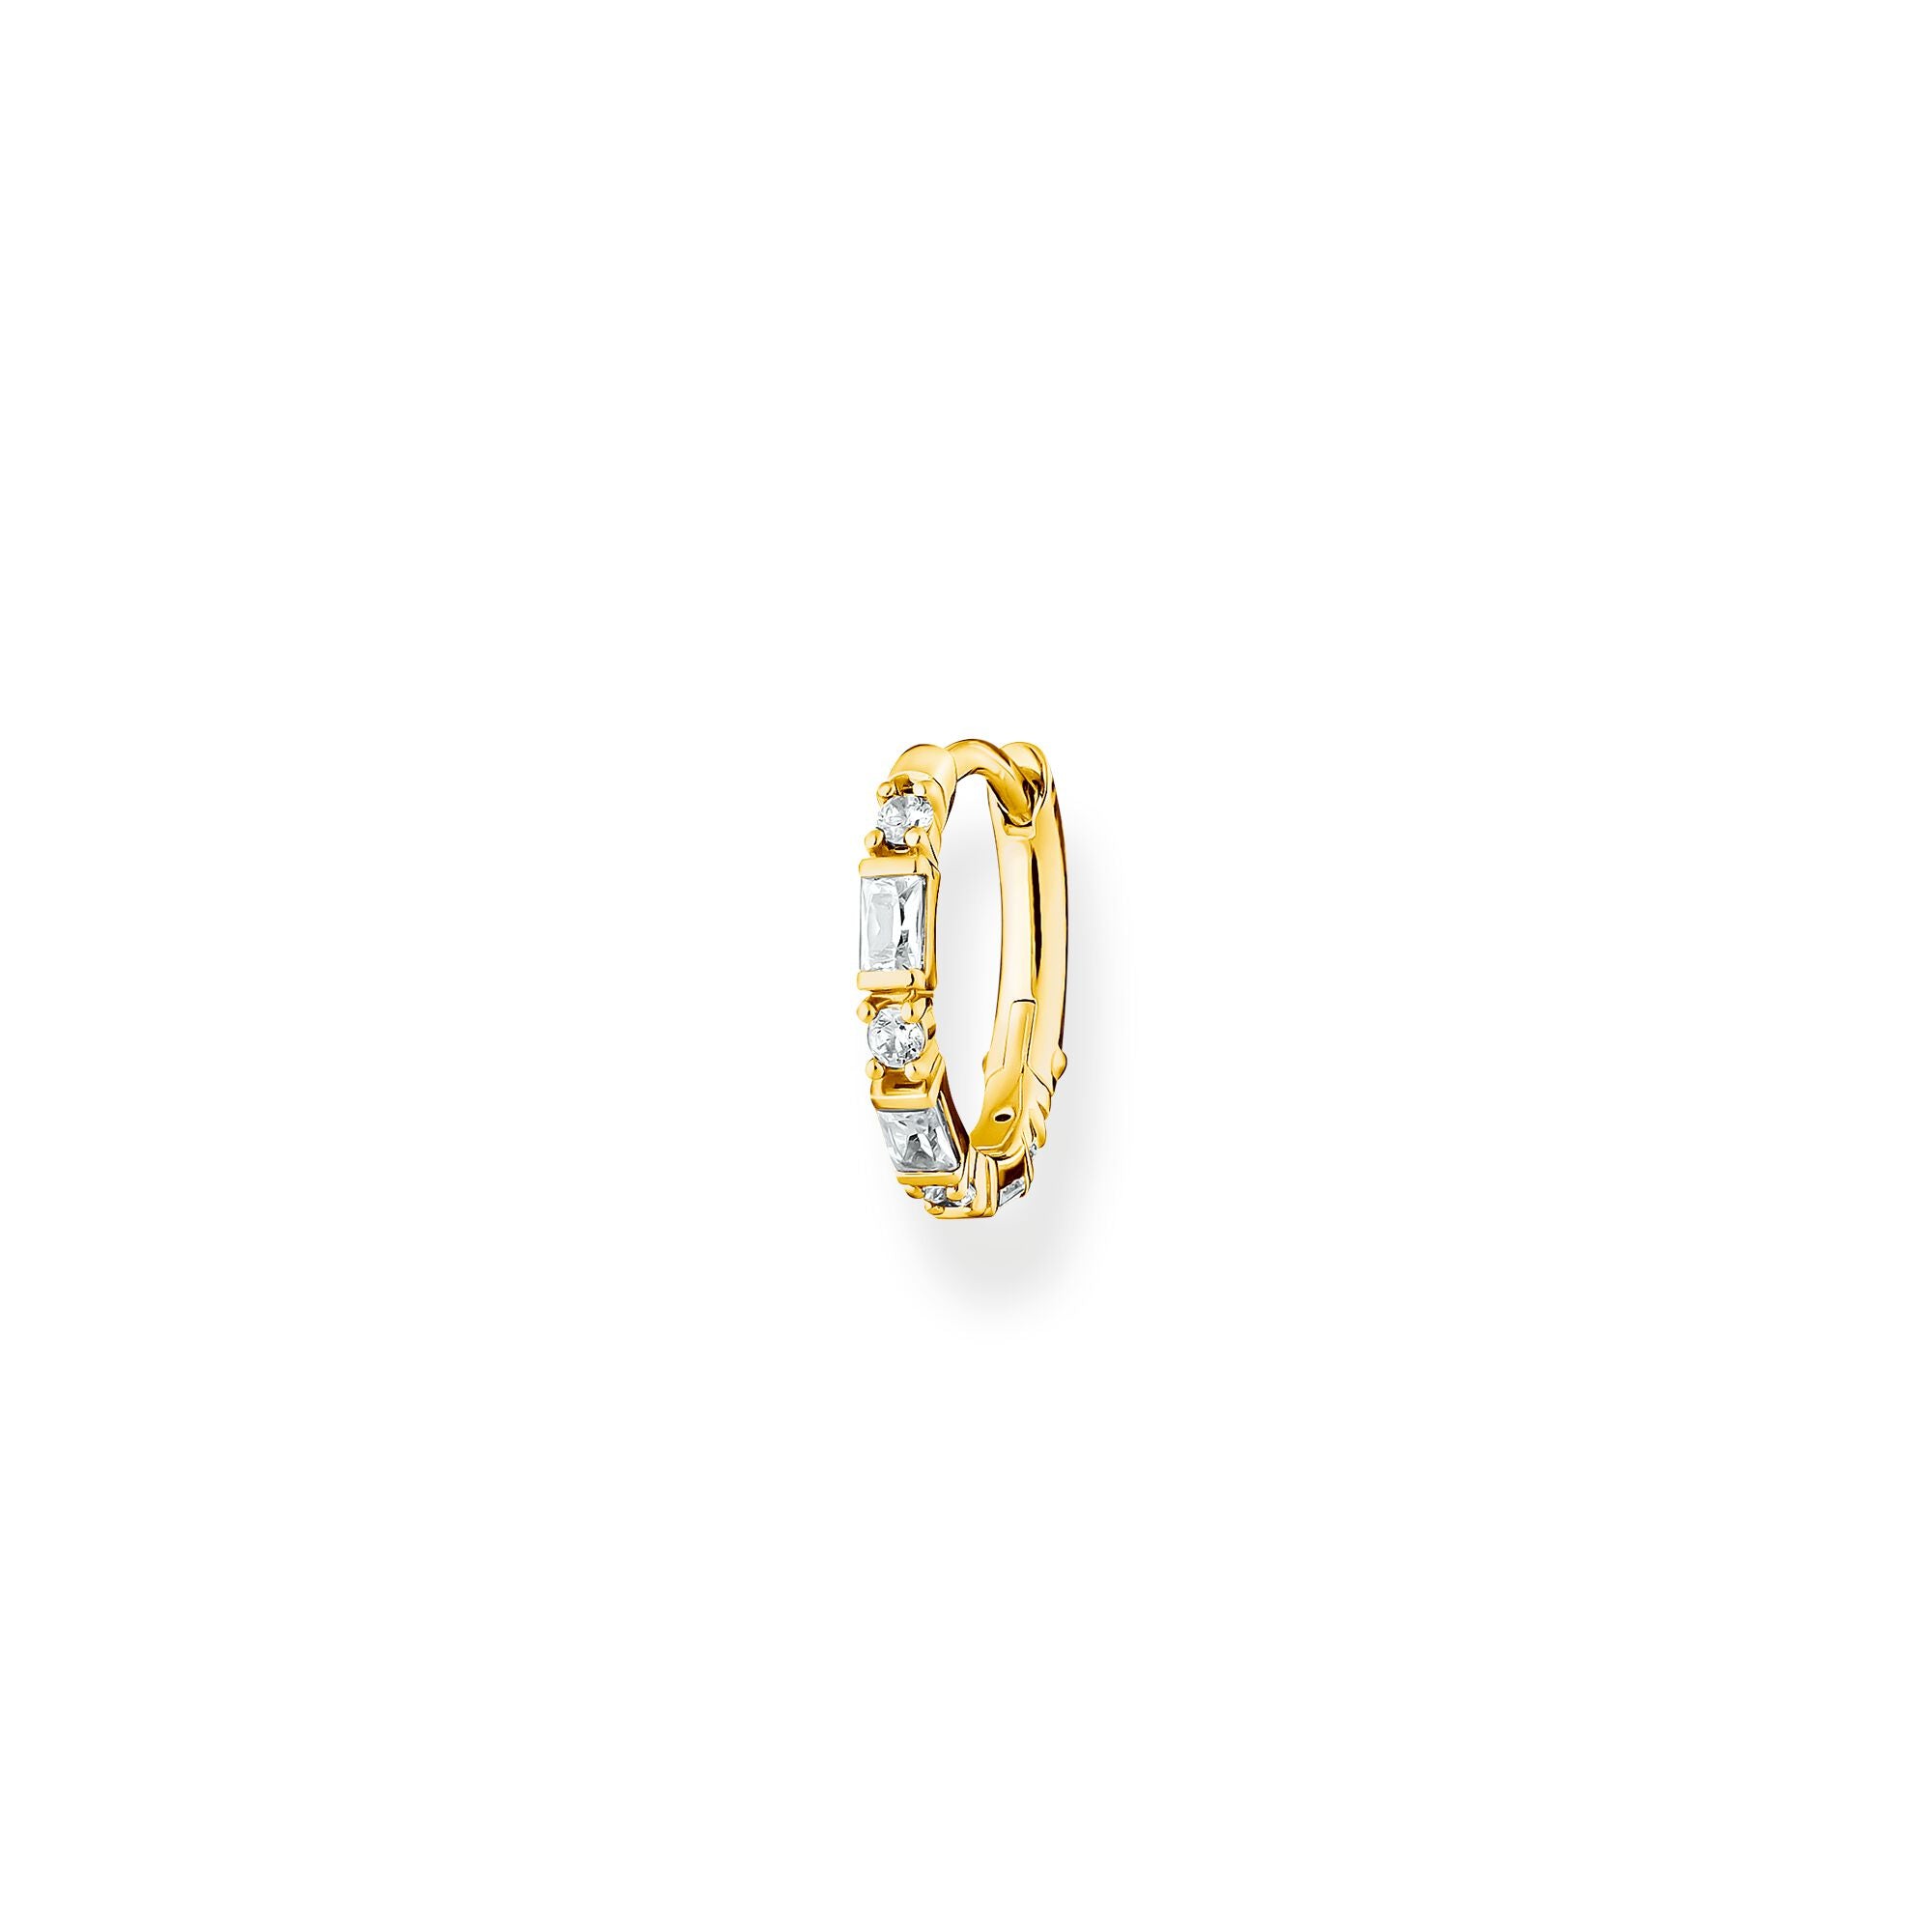 Thomas Sabo 18k yellow gold plated sterling silver and white baguette stones, clicker style single hoop earring